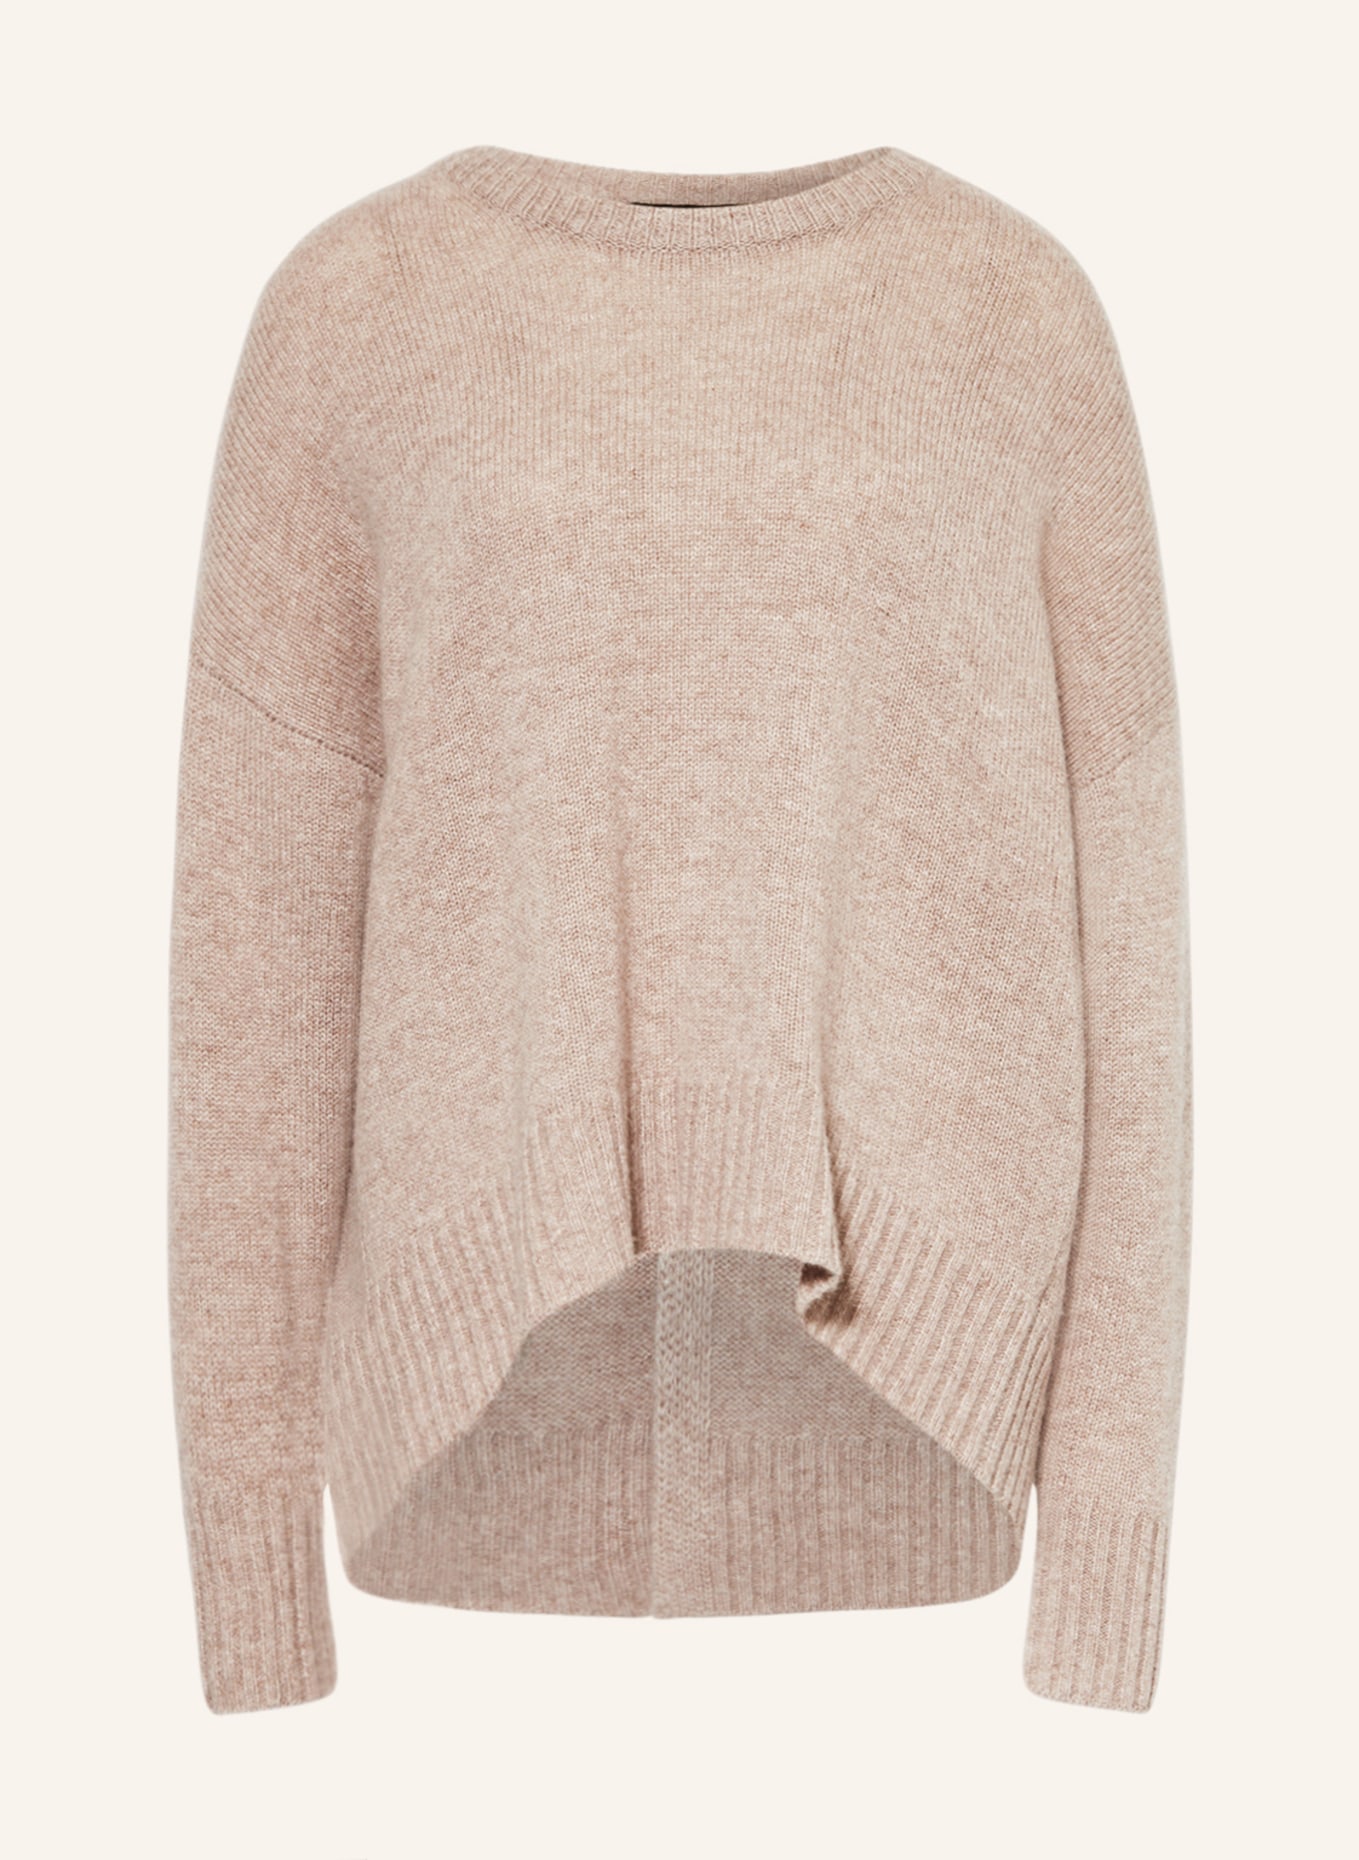 360CASHMERE Oversized-Pullover MELODY aus Cashmere, Farbe: TAUPE (Bild 1)